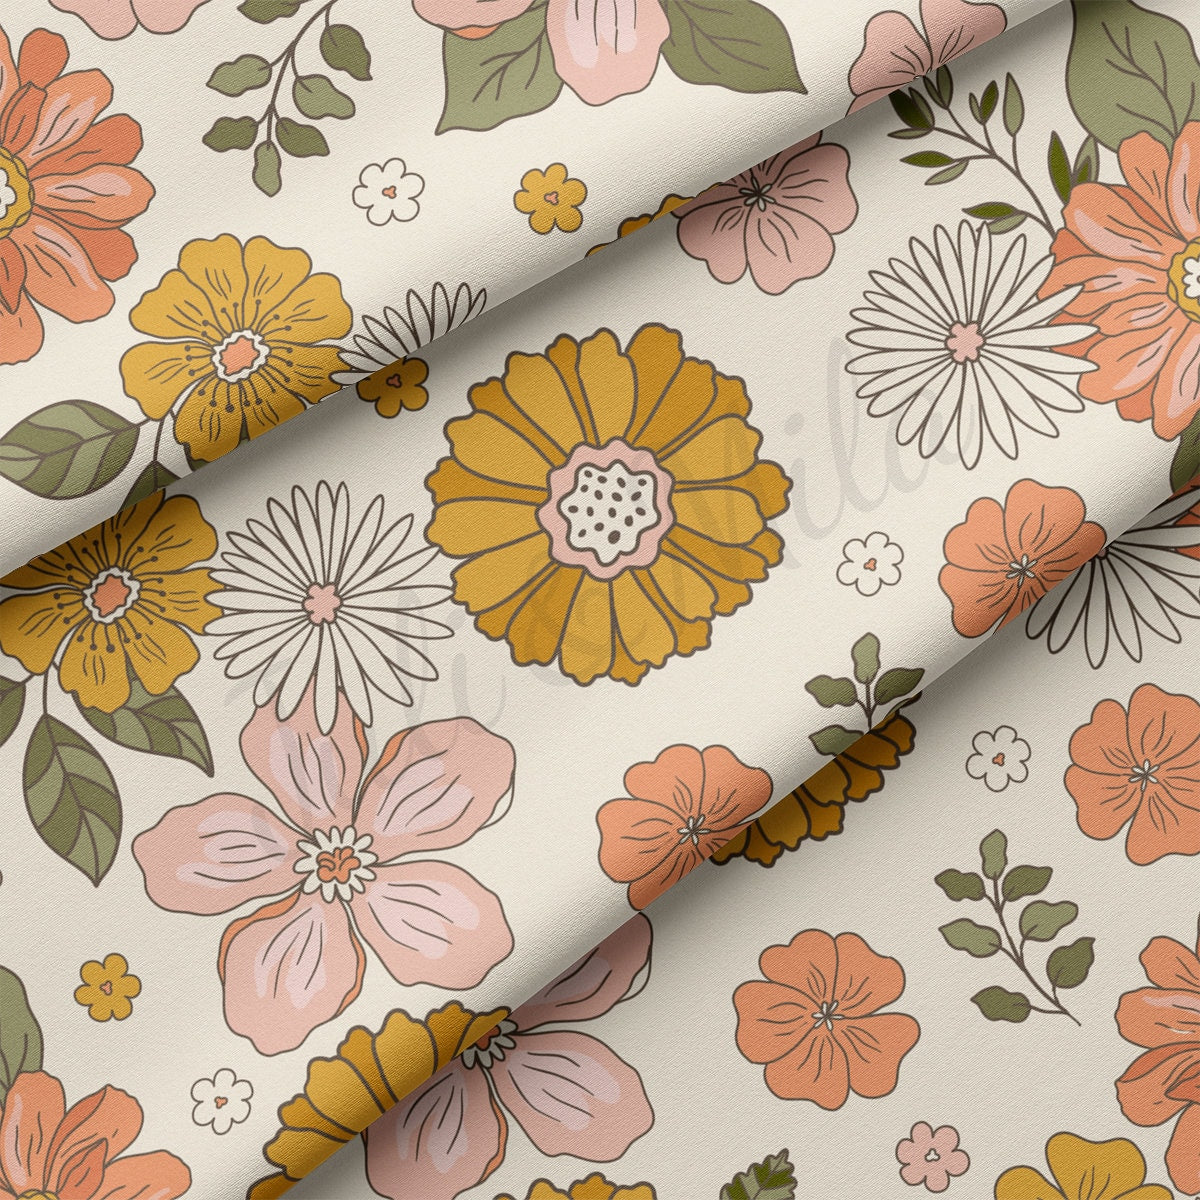 Floral DBP Fabric Double Brushed Polyester Fabric by the Yard DBP Jersey Stretchy Soft Polyester Stretch Fabric DBP2194